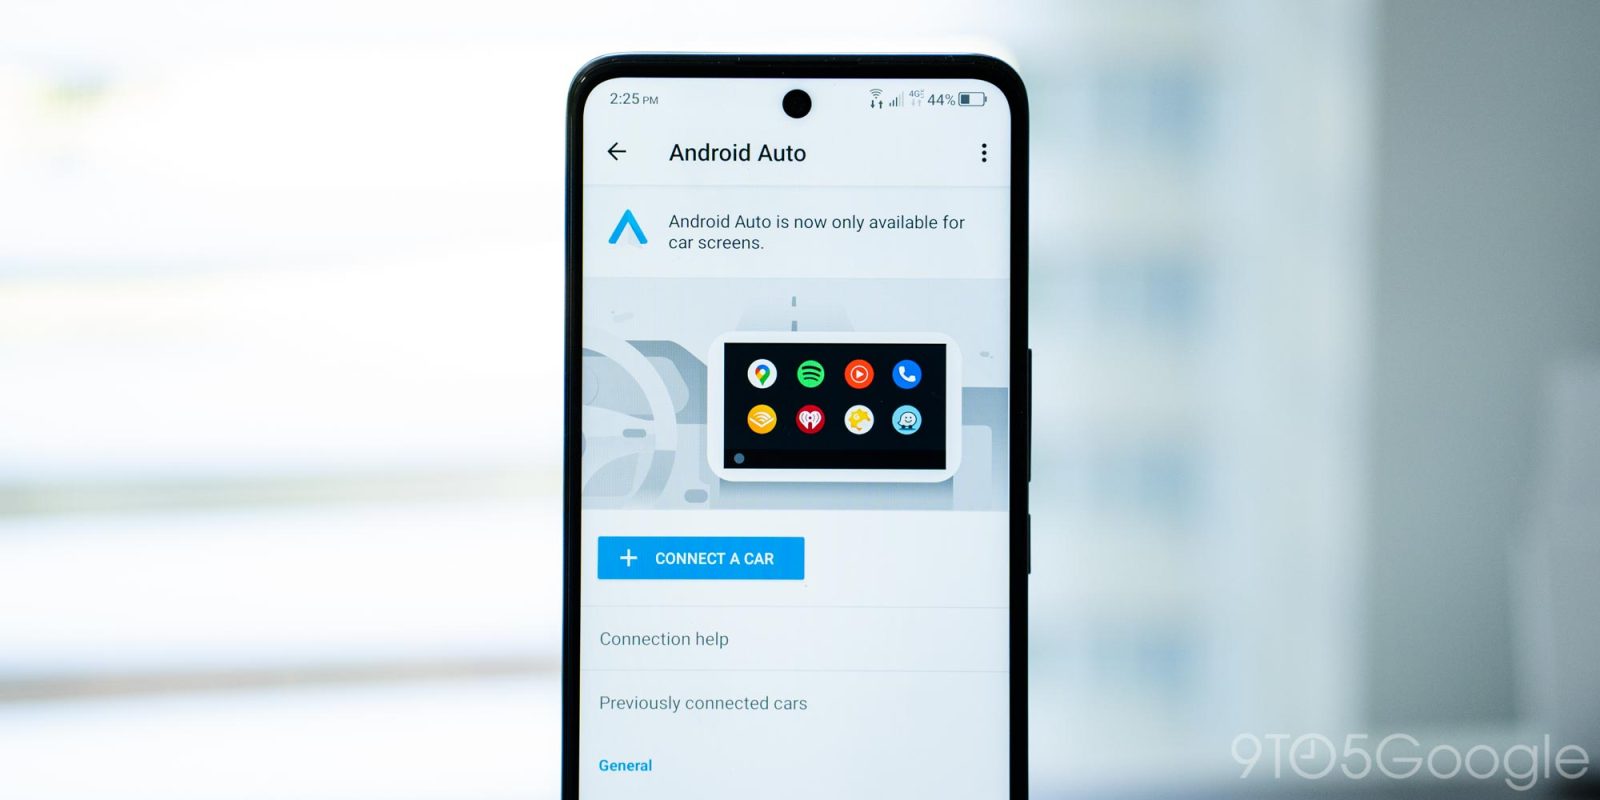 android auto is now only available for car screens